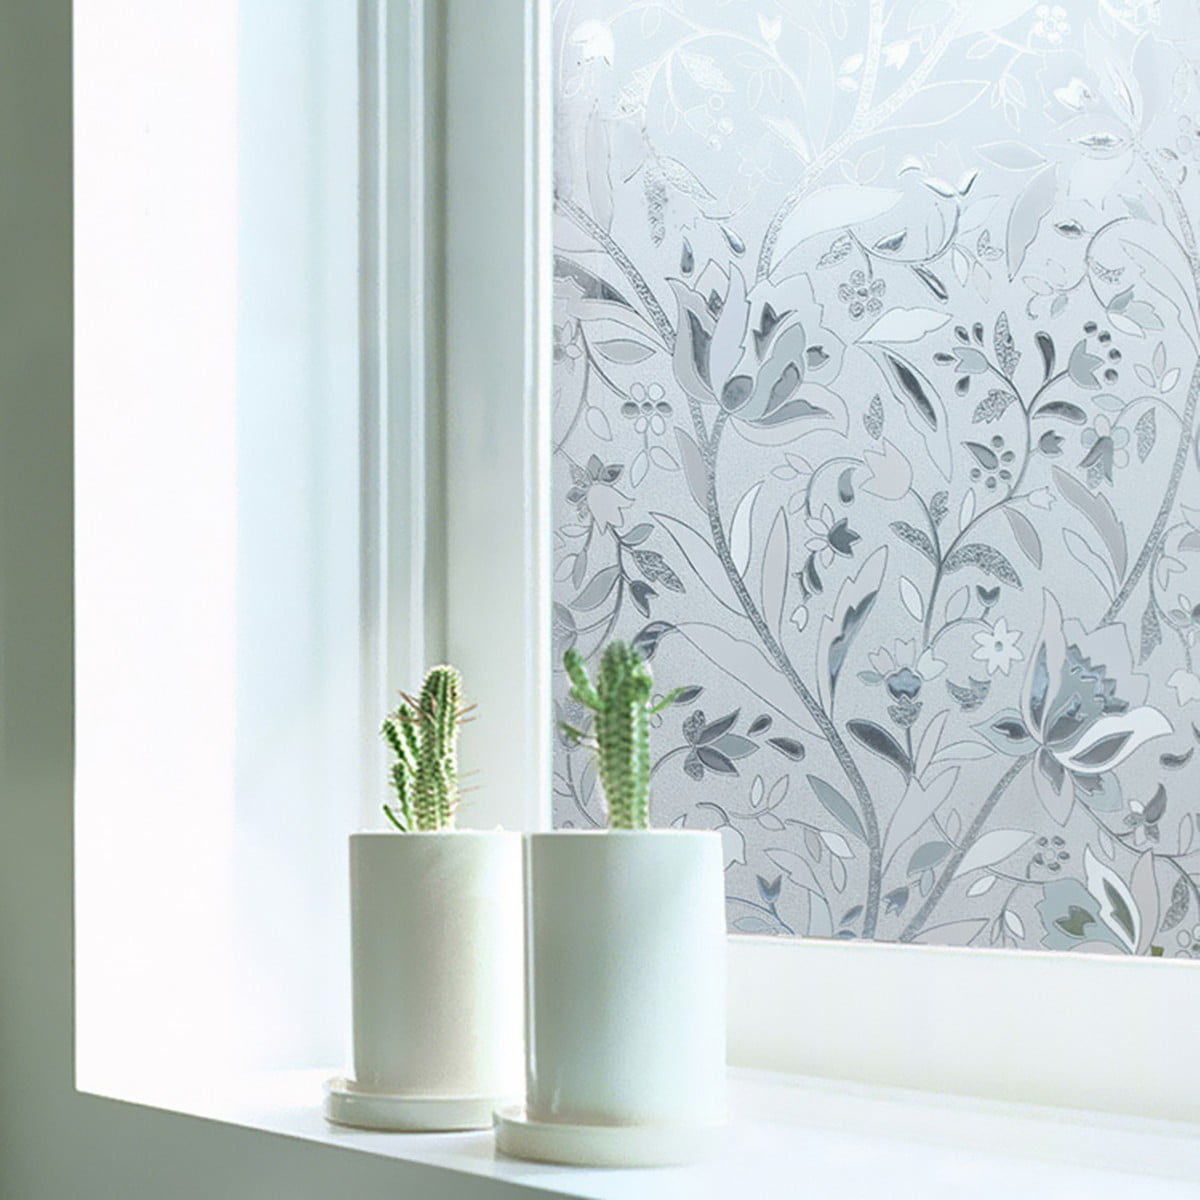 45x100cm Frosted Glass Window Sticker Film Privacy Flower Static Adhesive Cover 